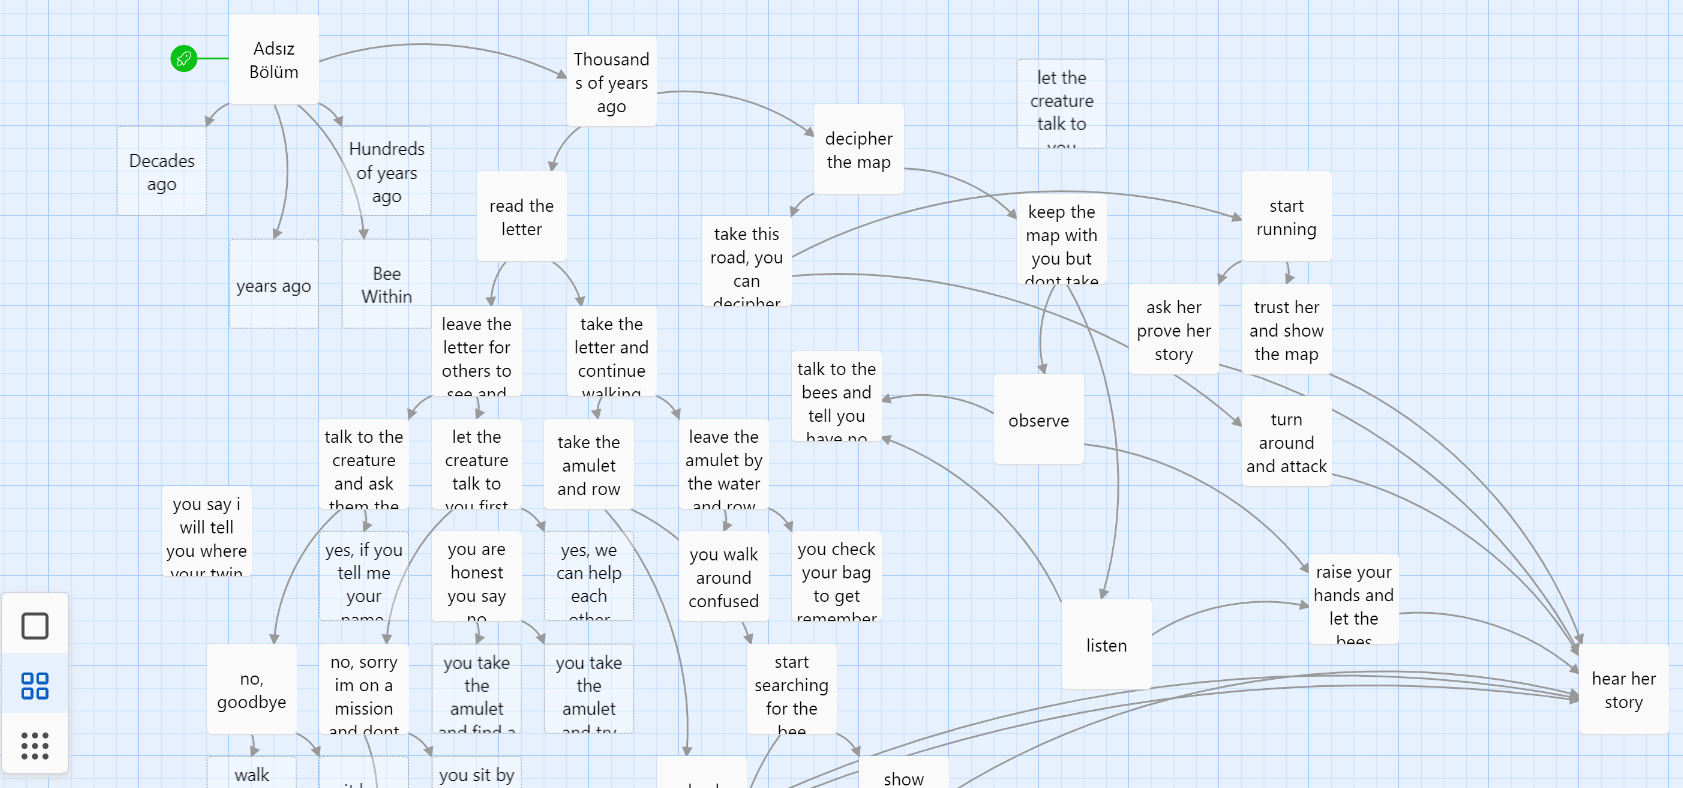 “The twine map of text based story, reachable from Bee Within by clicking to hear more about Gray the tree.”